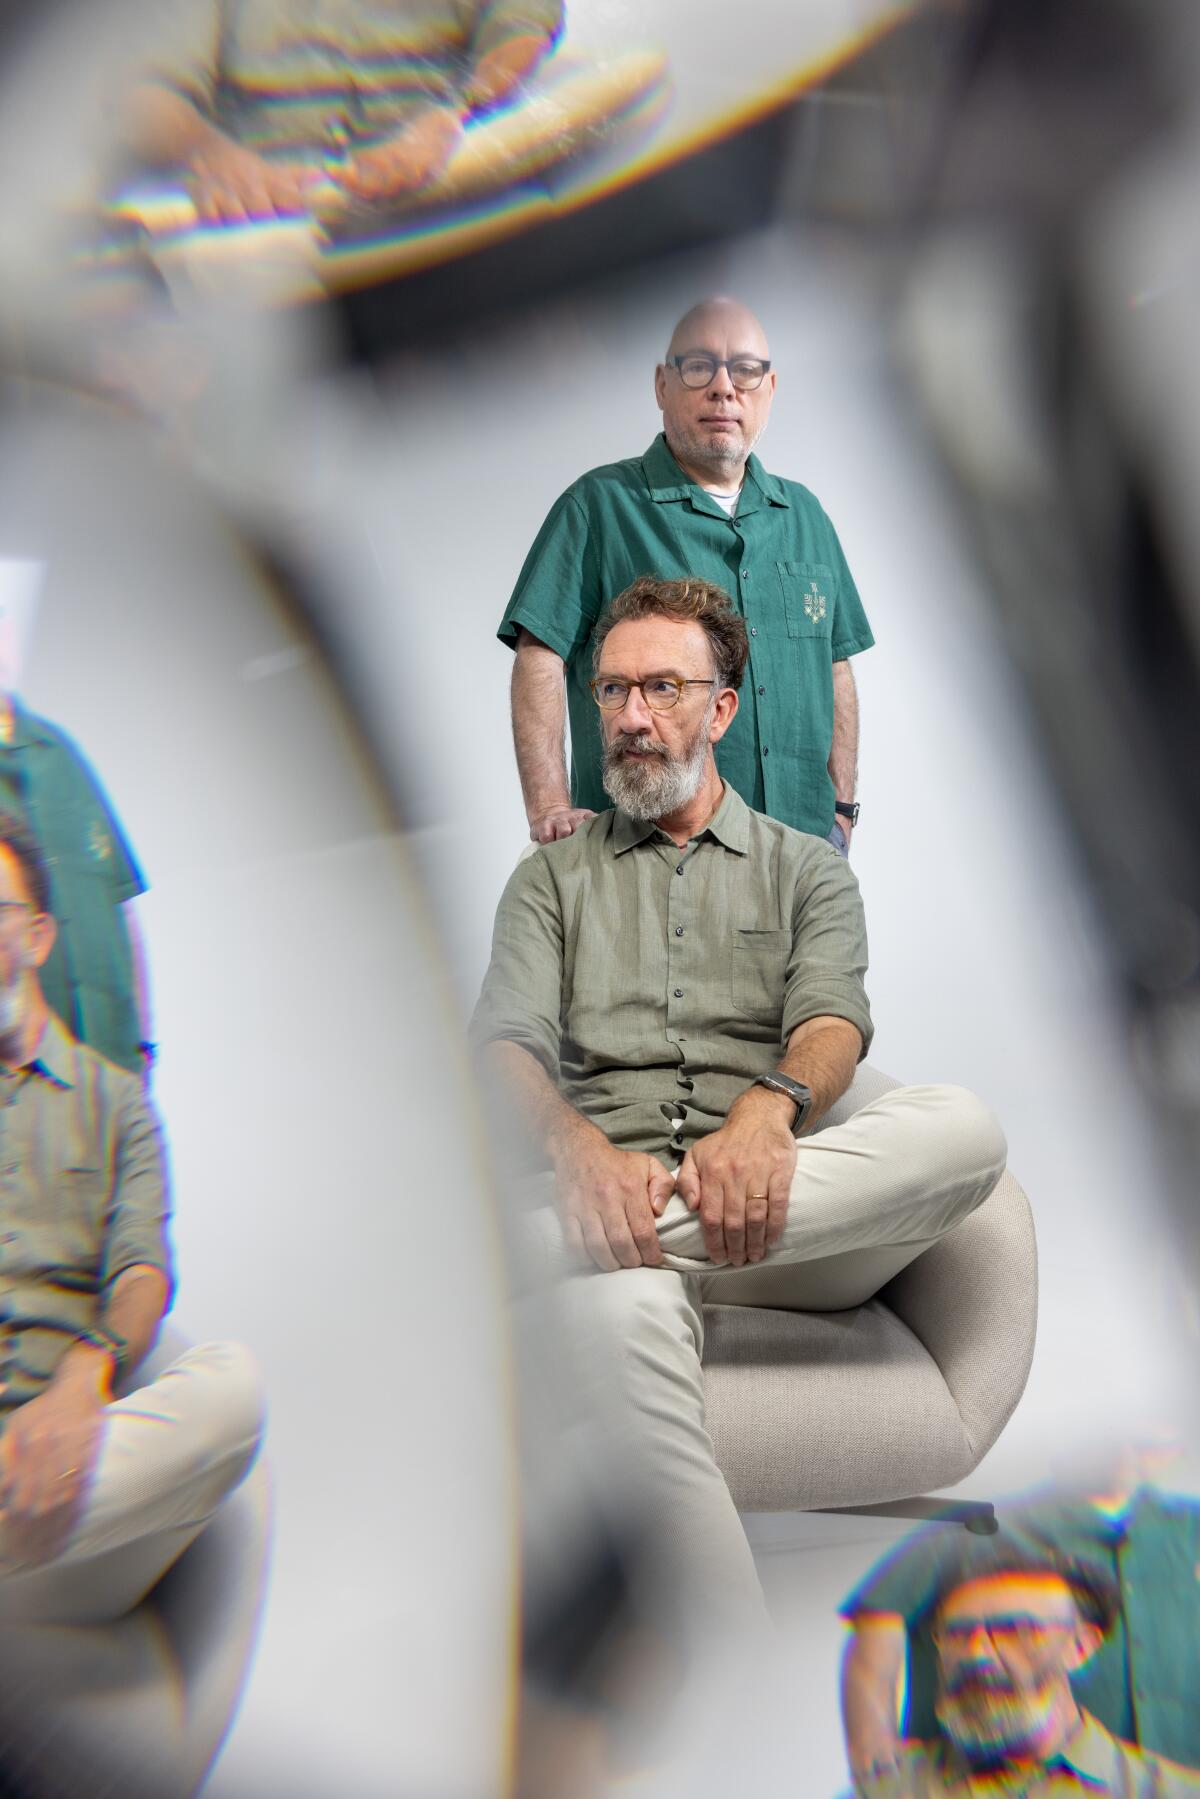 Through a prism: A bearded, bespectacled man in a chair (John Carney) and behind, a bald man in a green shirt (Gary Clark)